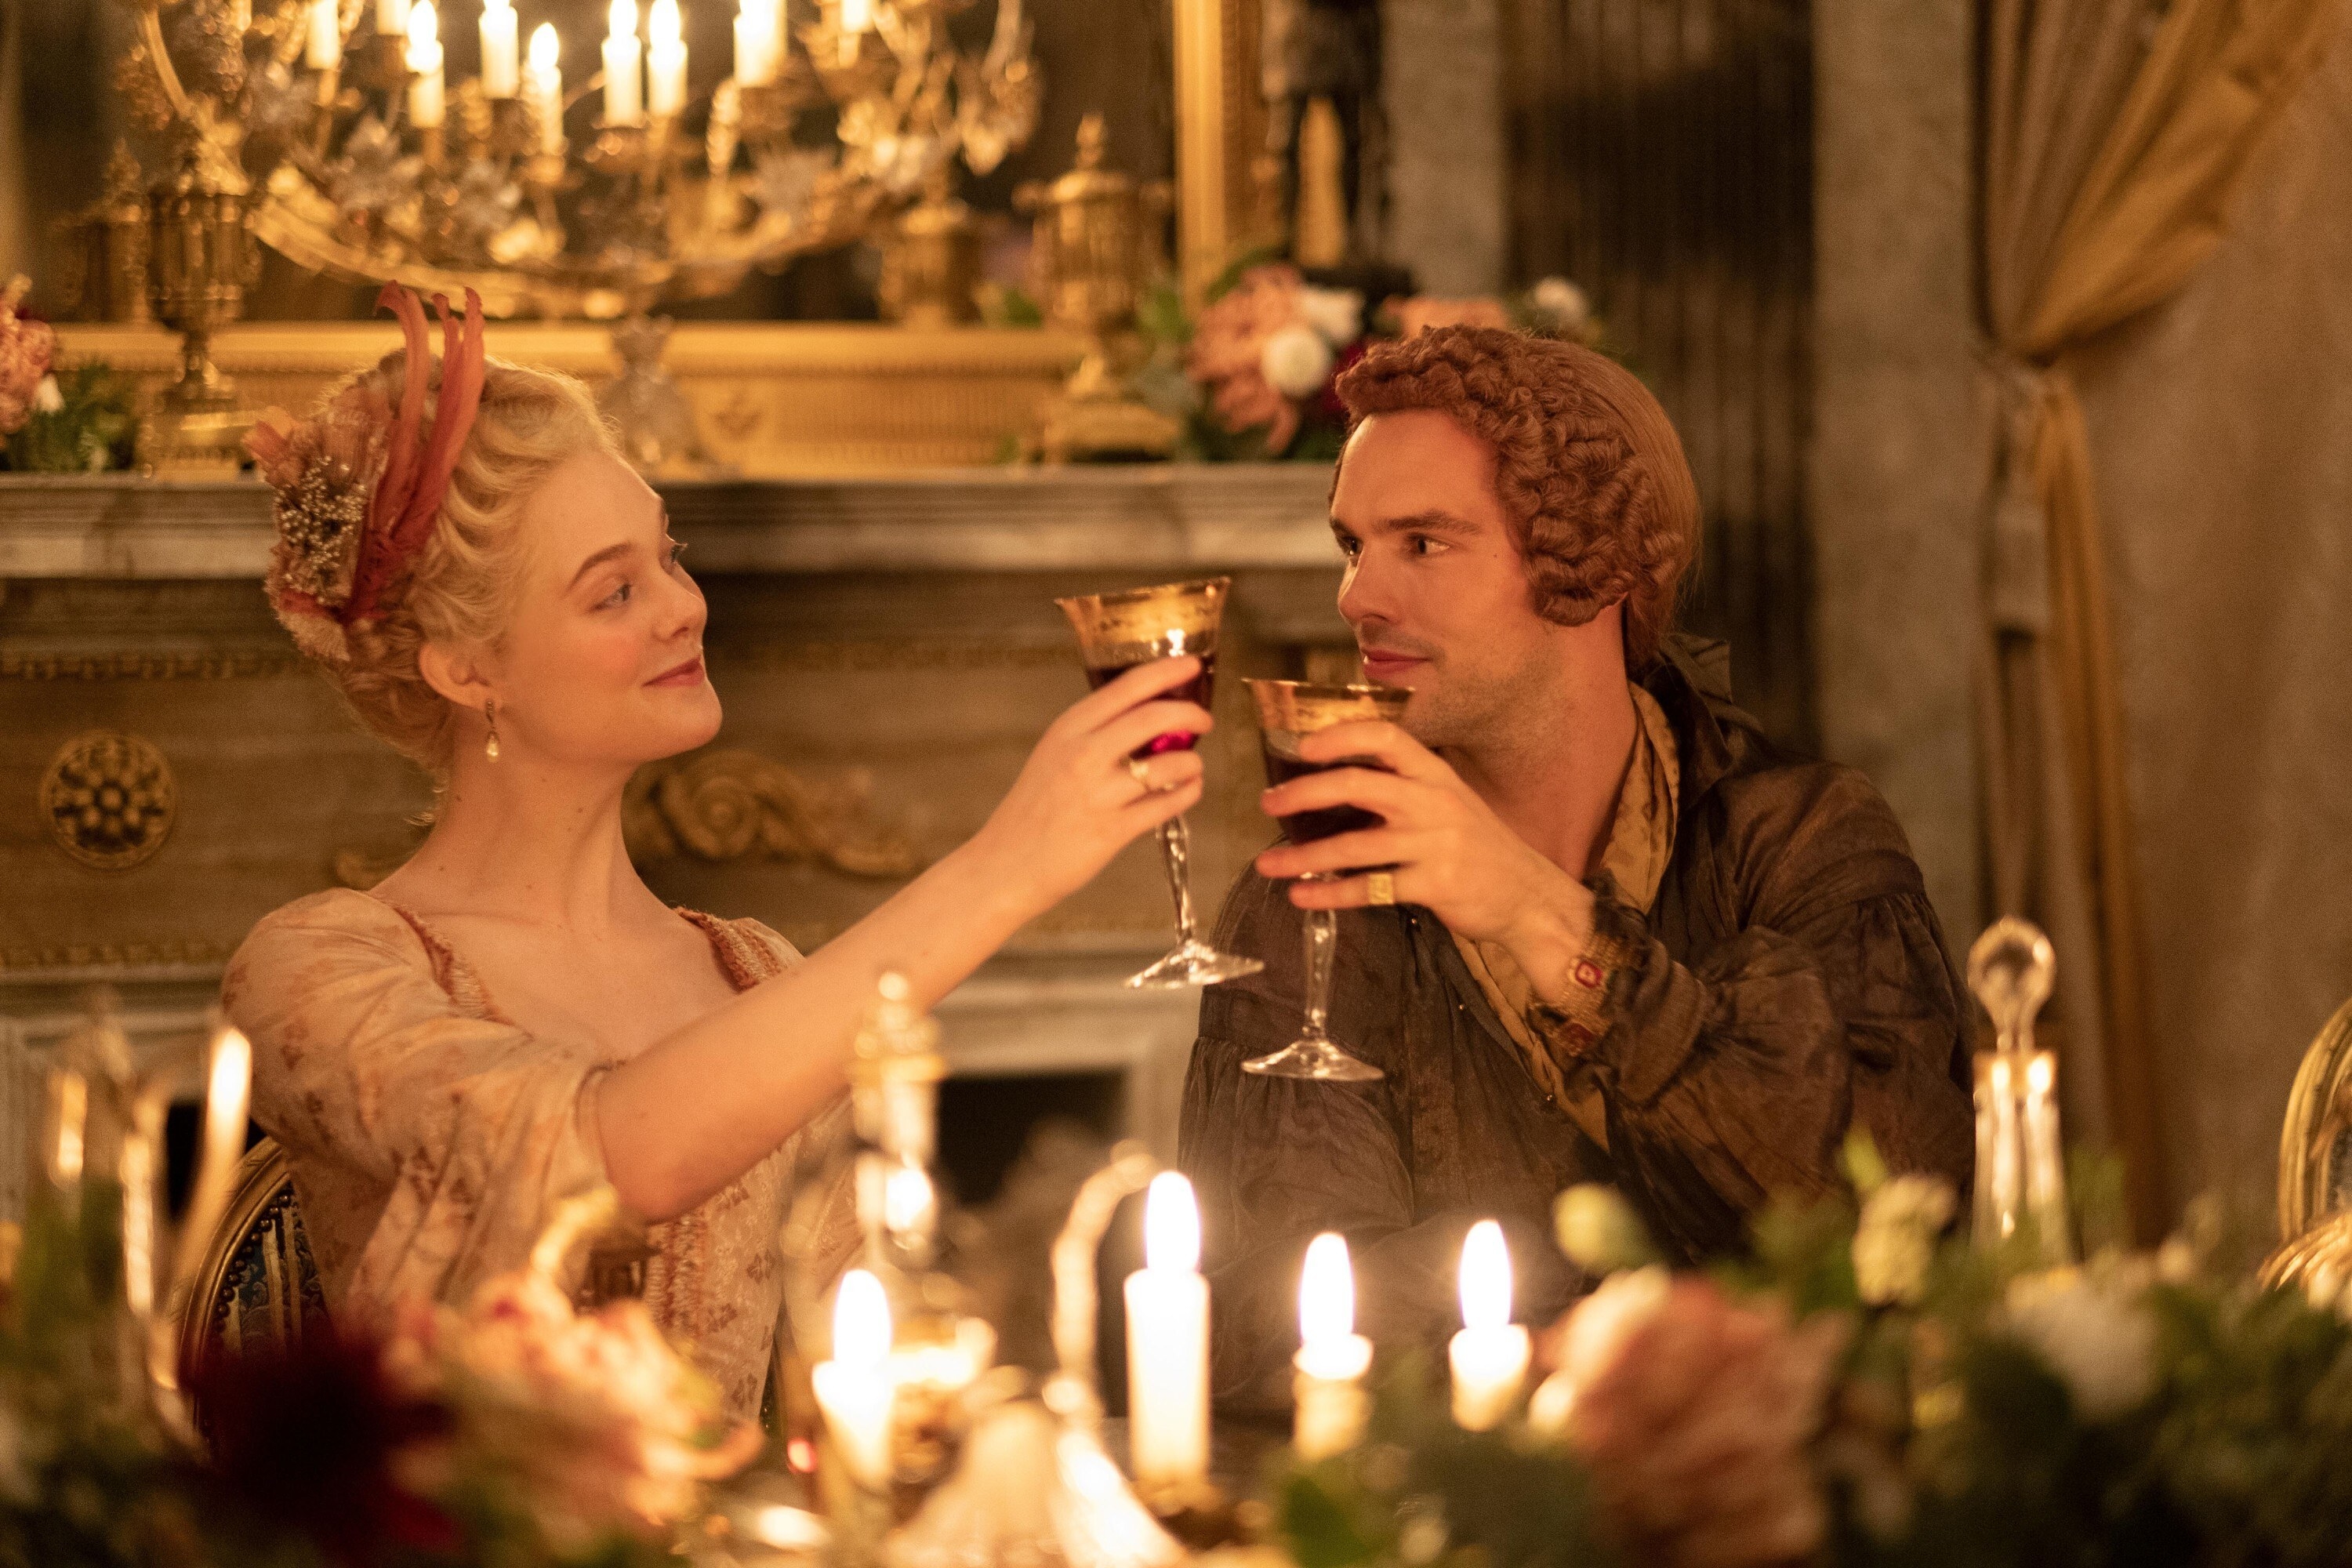 A blonde woman and a man with a curly wig cheers with glasses of red wine. In front of them are candles.